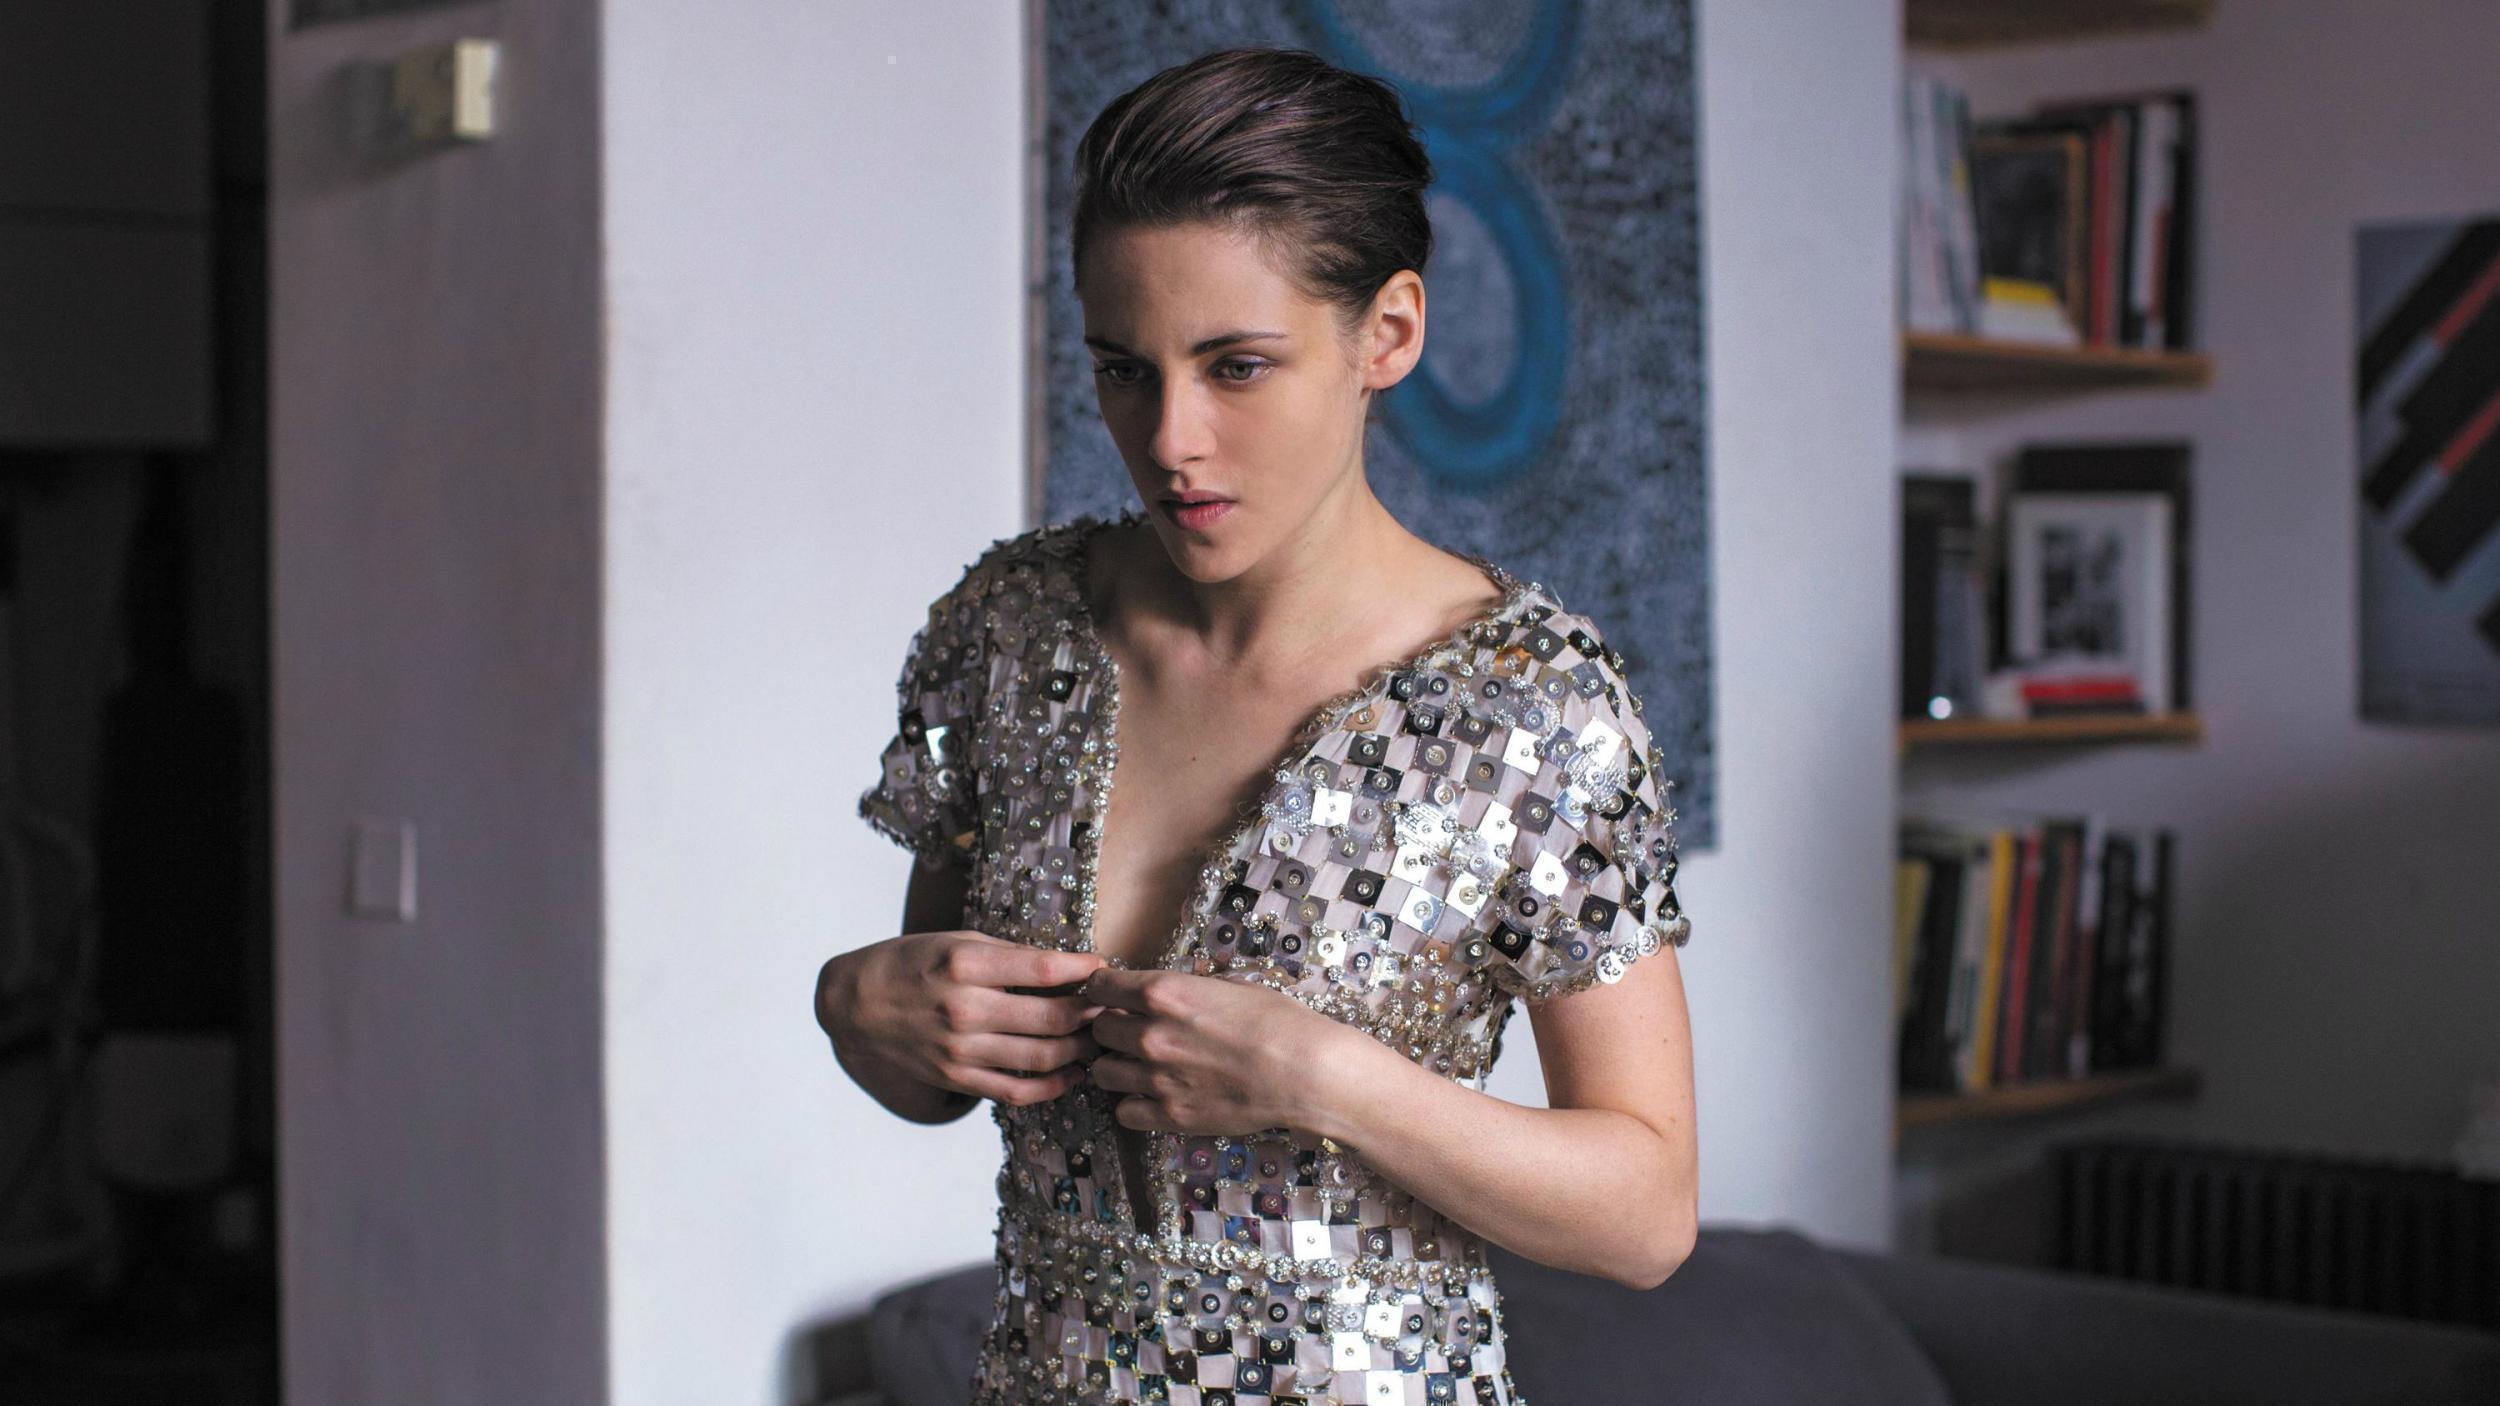 Stewart, who also starred in Assayas' film 'Clouds of Sils Maria', inspired his screenplay 'Personal Shopper'